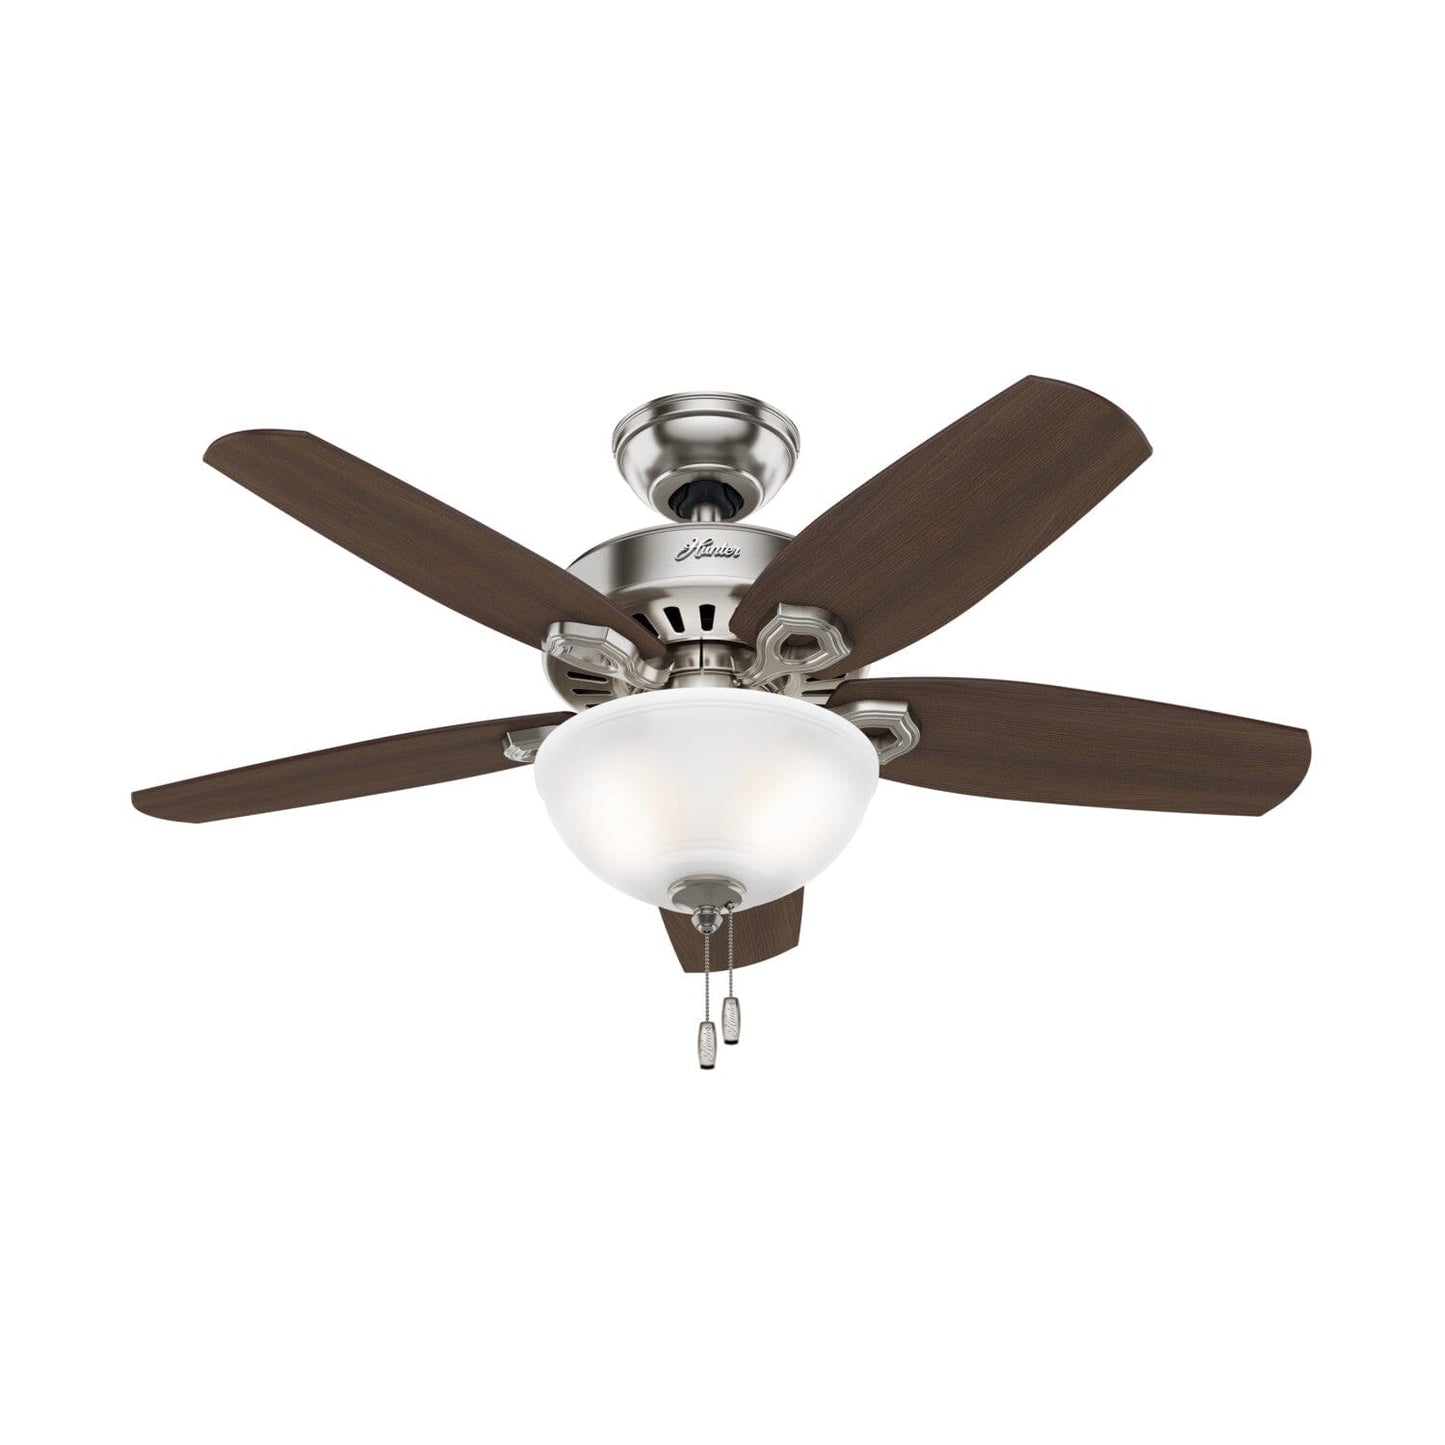 Builder with Light 42 inch Ceiling Fans Hunter Brushed Nickel - Brazilian Cherry 